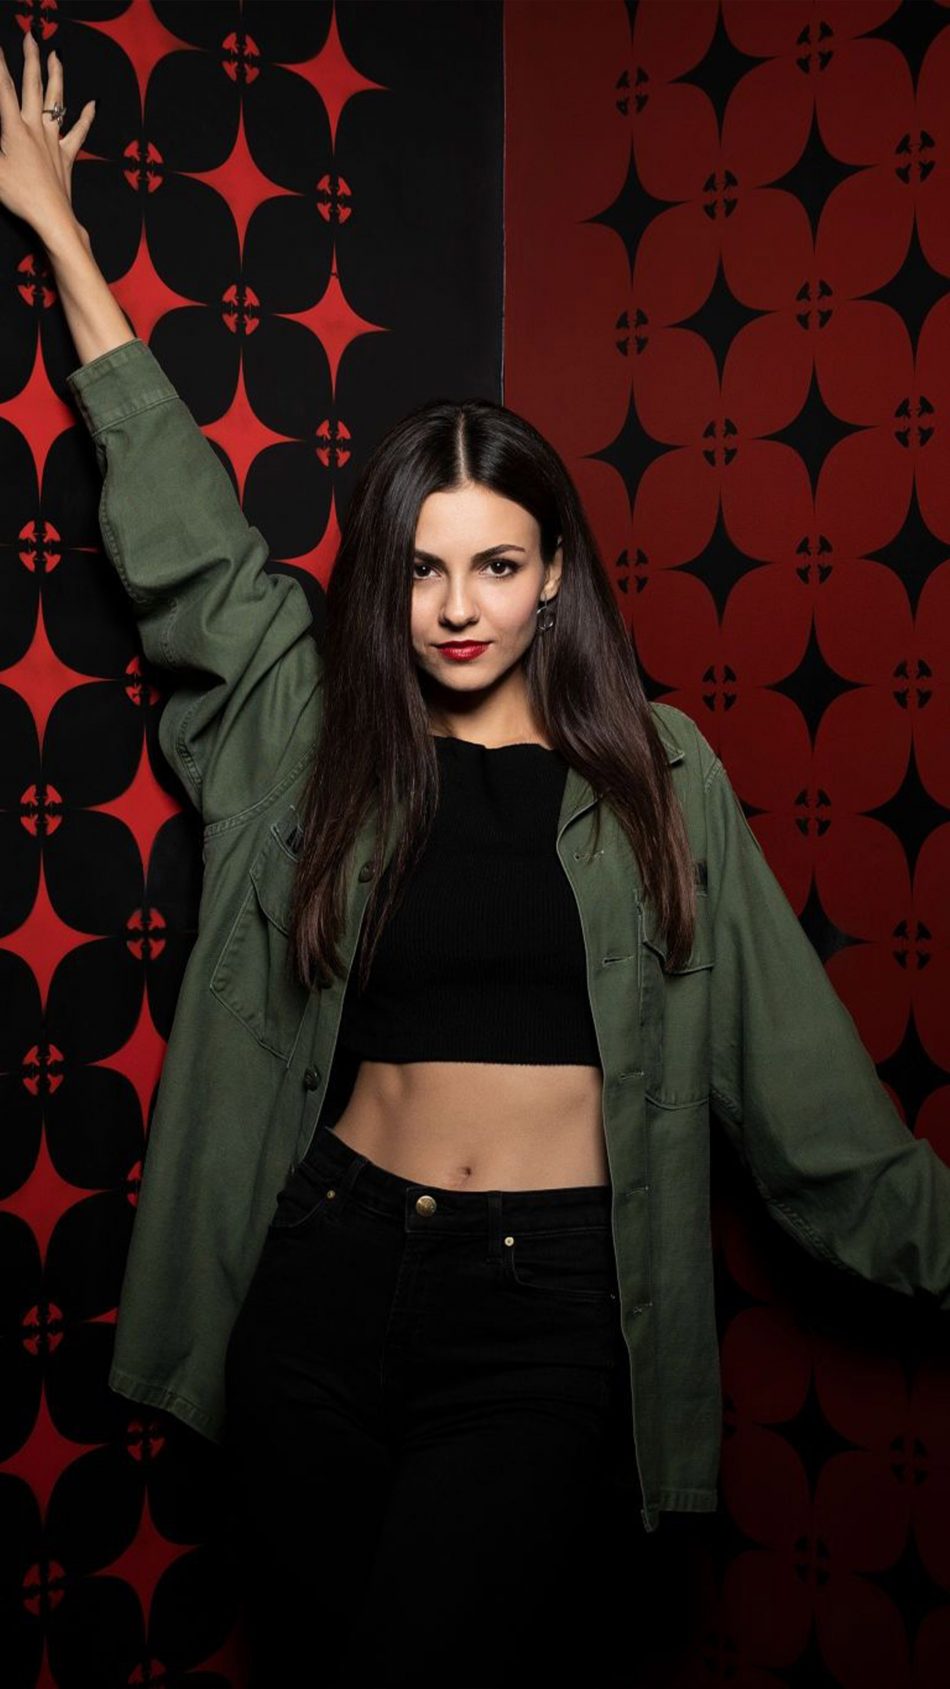 Victoria Justice Photoshoot 2019 4K Ultra HD Mobile Wallpaper